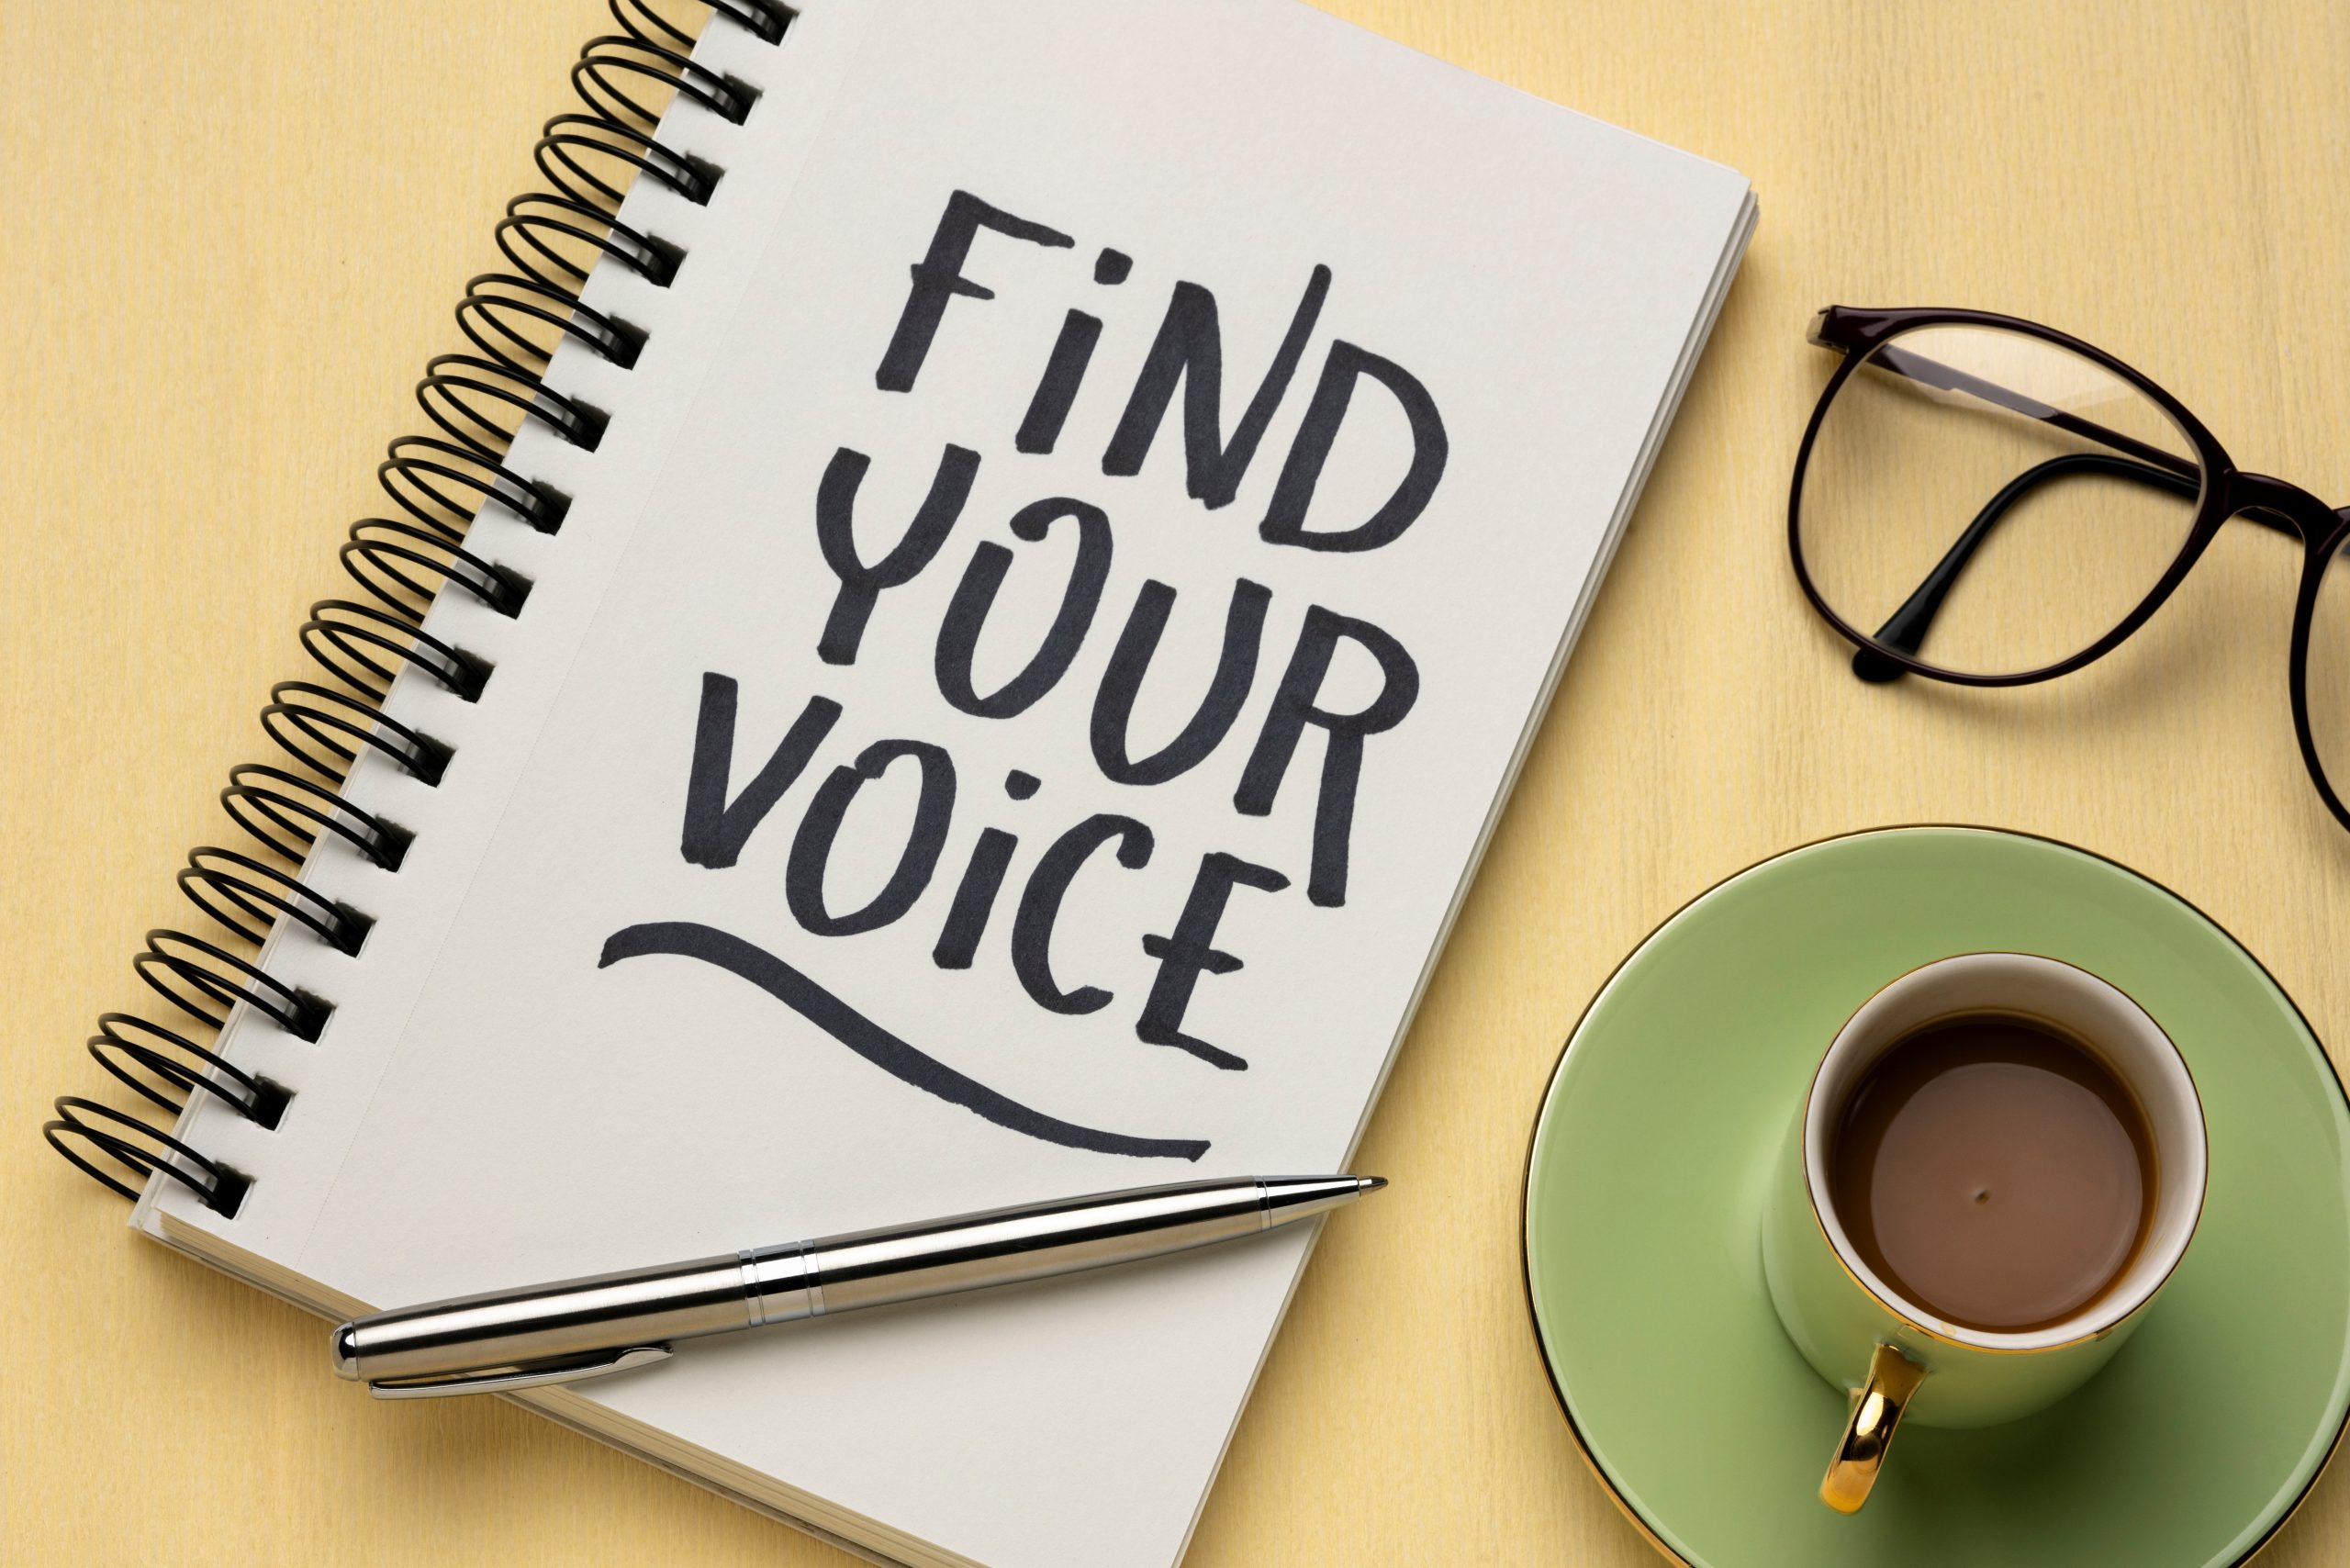 Find your brand voice